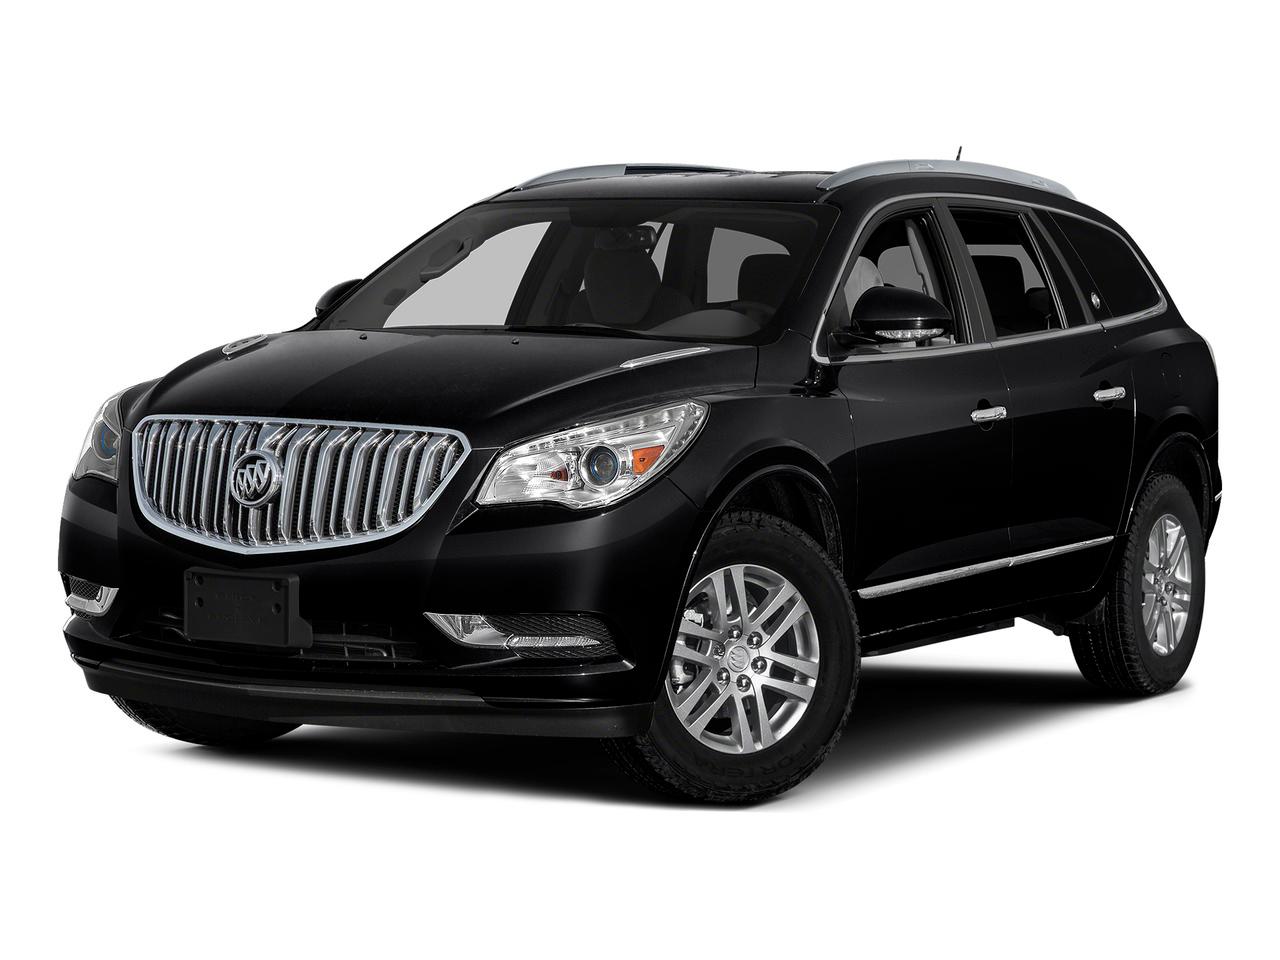 2016 Buick Enclave Vehicle Photo in Saint Charles, IL 60174